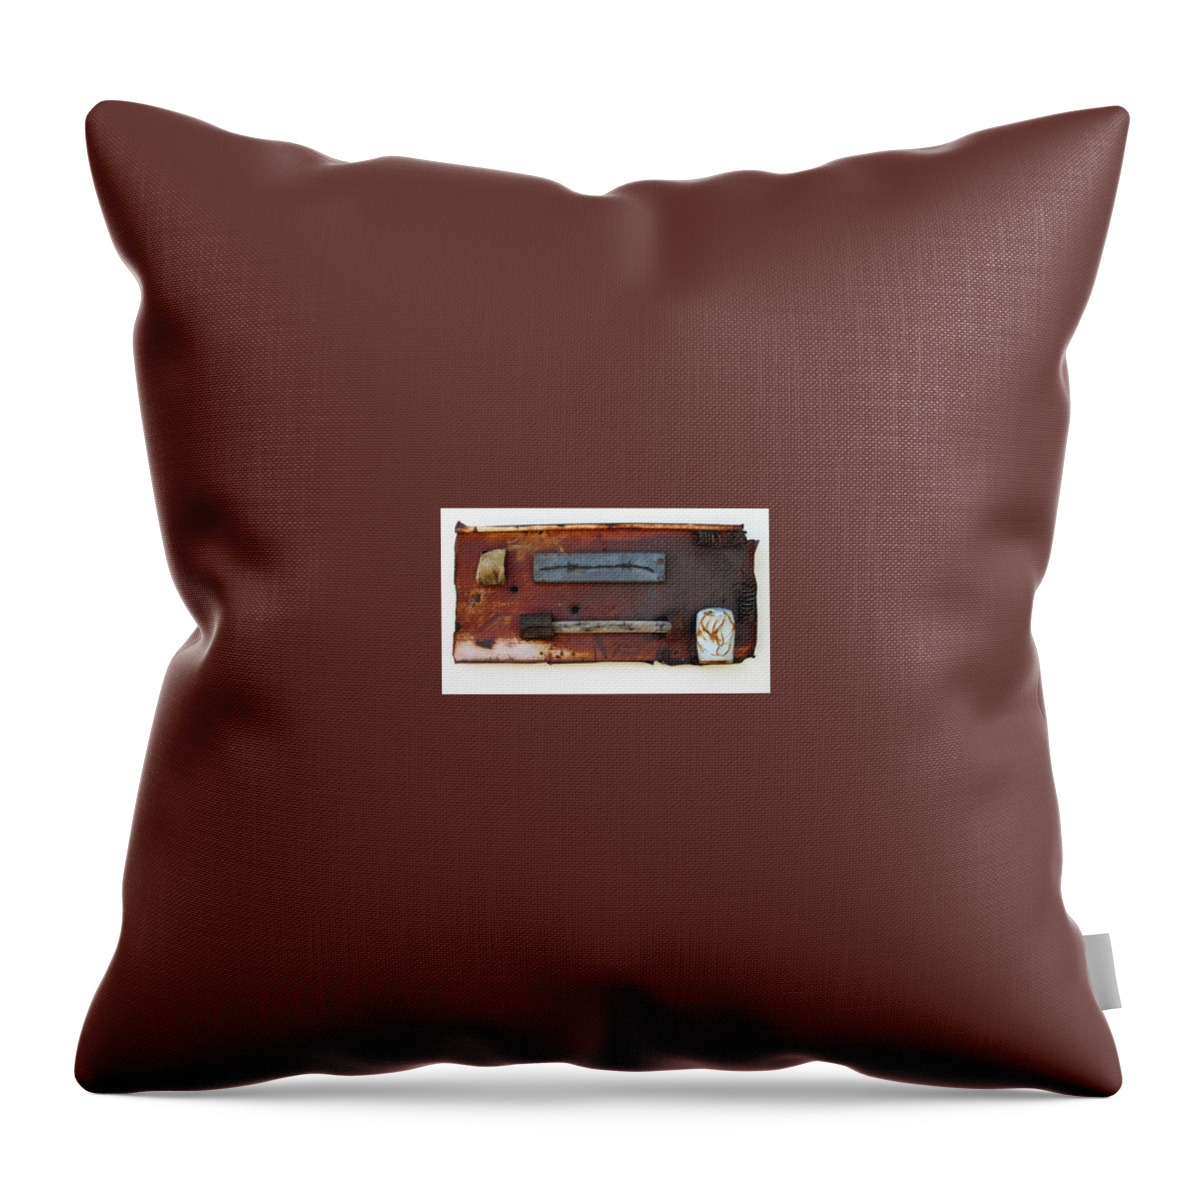 Assemblage Sculptures Throw Pillow featuring the sculpture Savory Truffle by Snake Jagger